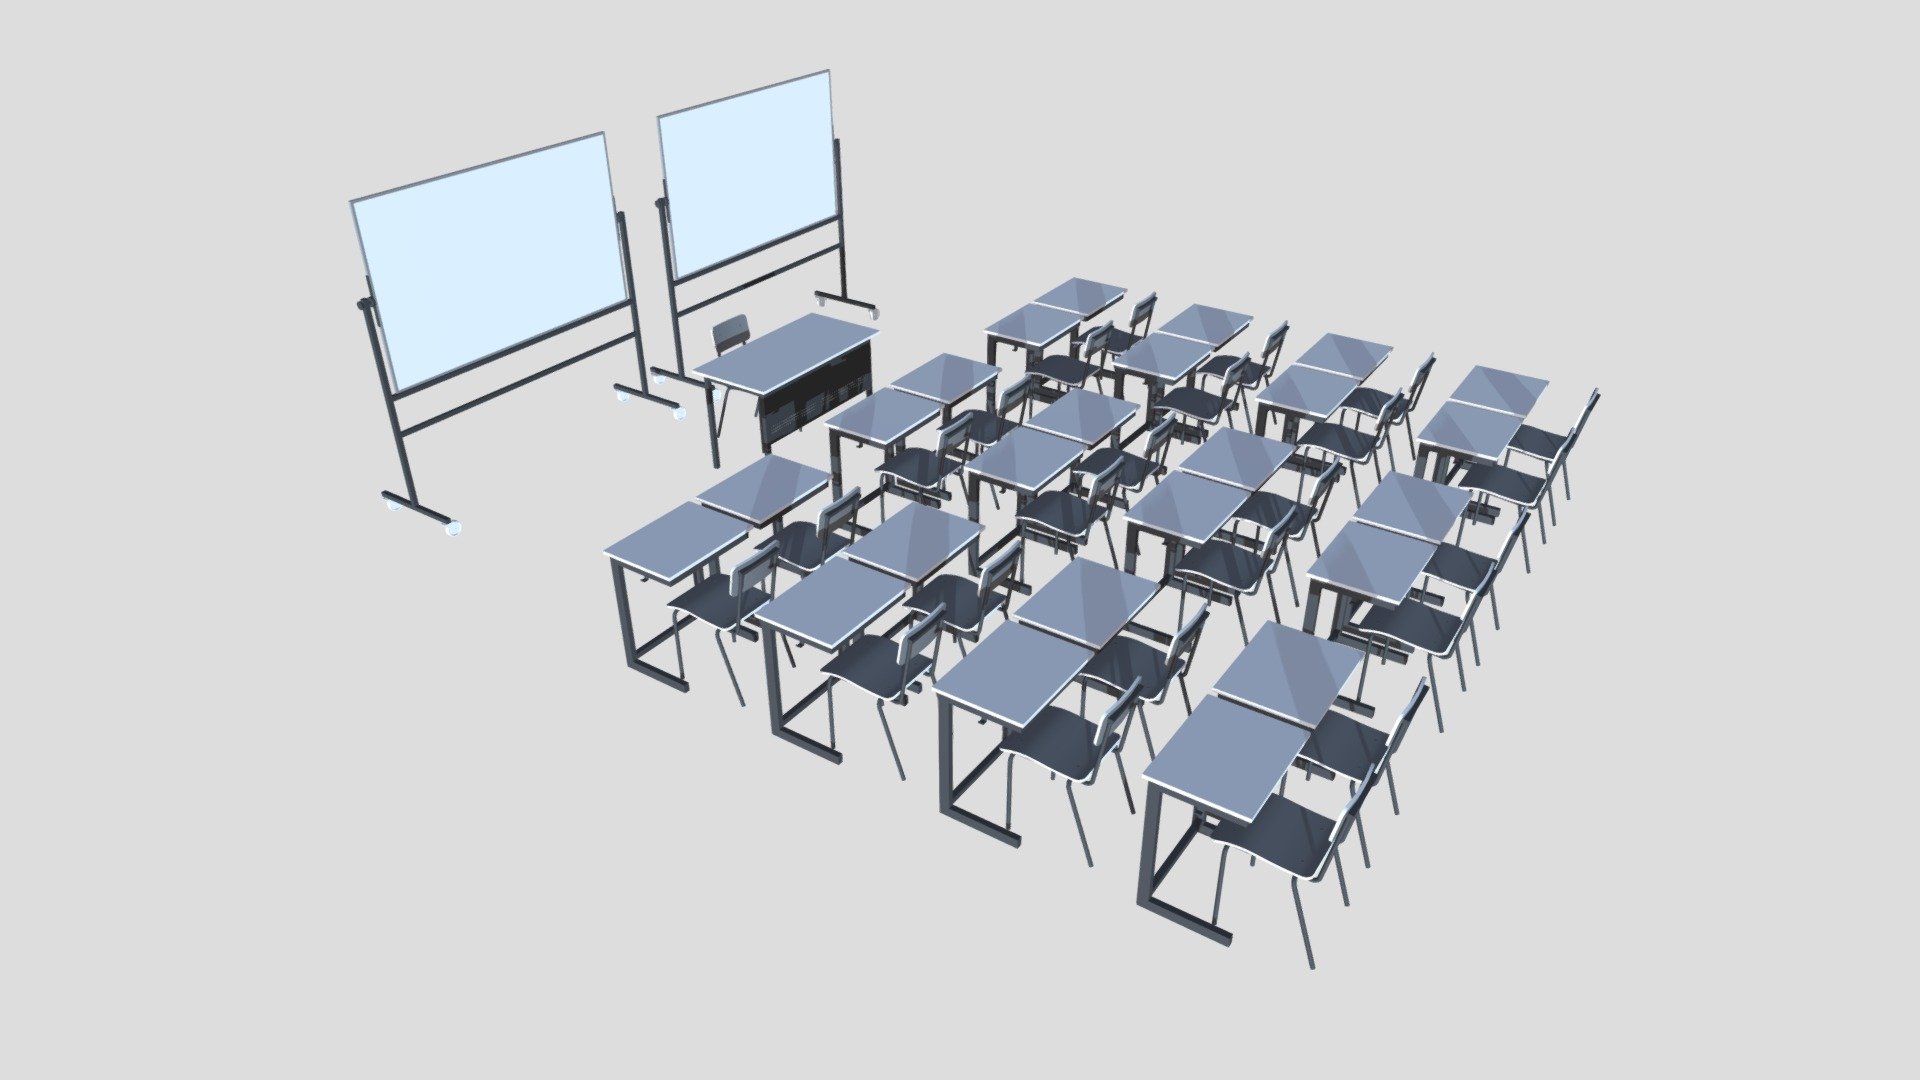 School Classroom Furniture Complete Set

**School Classroom Furniture - Complete SET - Gray

4 complete 3d models: chair, table, desk and whiteboard**

Created in 3ds max 2018, with materials, created without textures, only geometry and materials

Optimized number of polygons Materials asigned No textures

Optimized geometry Rounded corners (material) Real world scale

3ds max format fbx format 3ds format obj format dae format dwg format

3ds max file was created in vray, and it contains lights and cameras 3d model